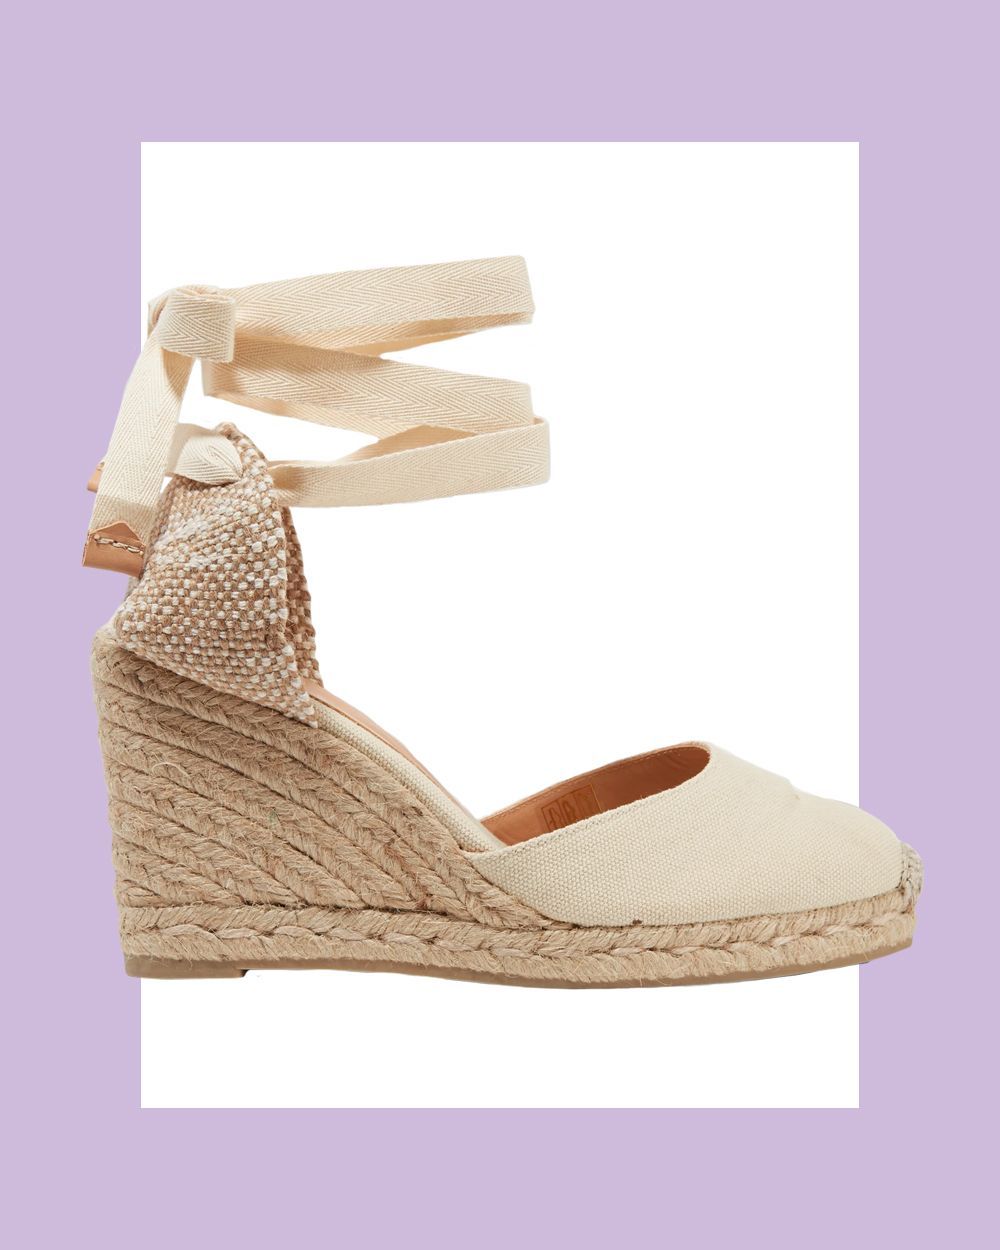 Carina 80 Canvas Wedge Espadrilles in Ivory